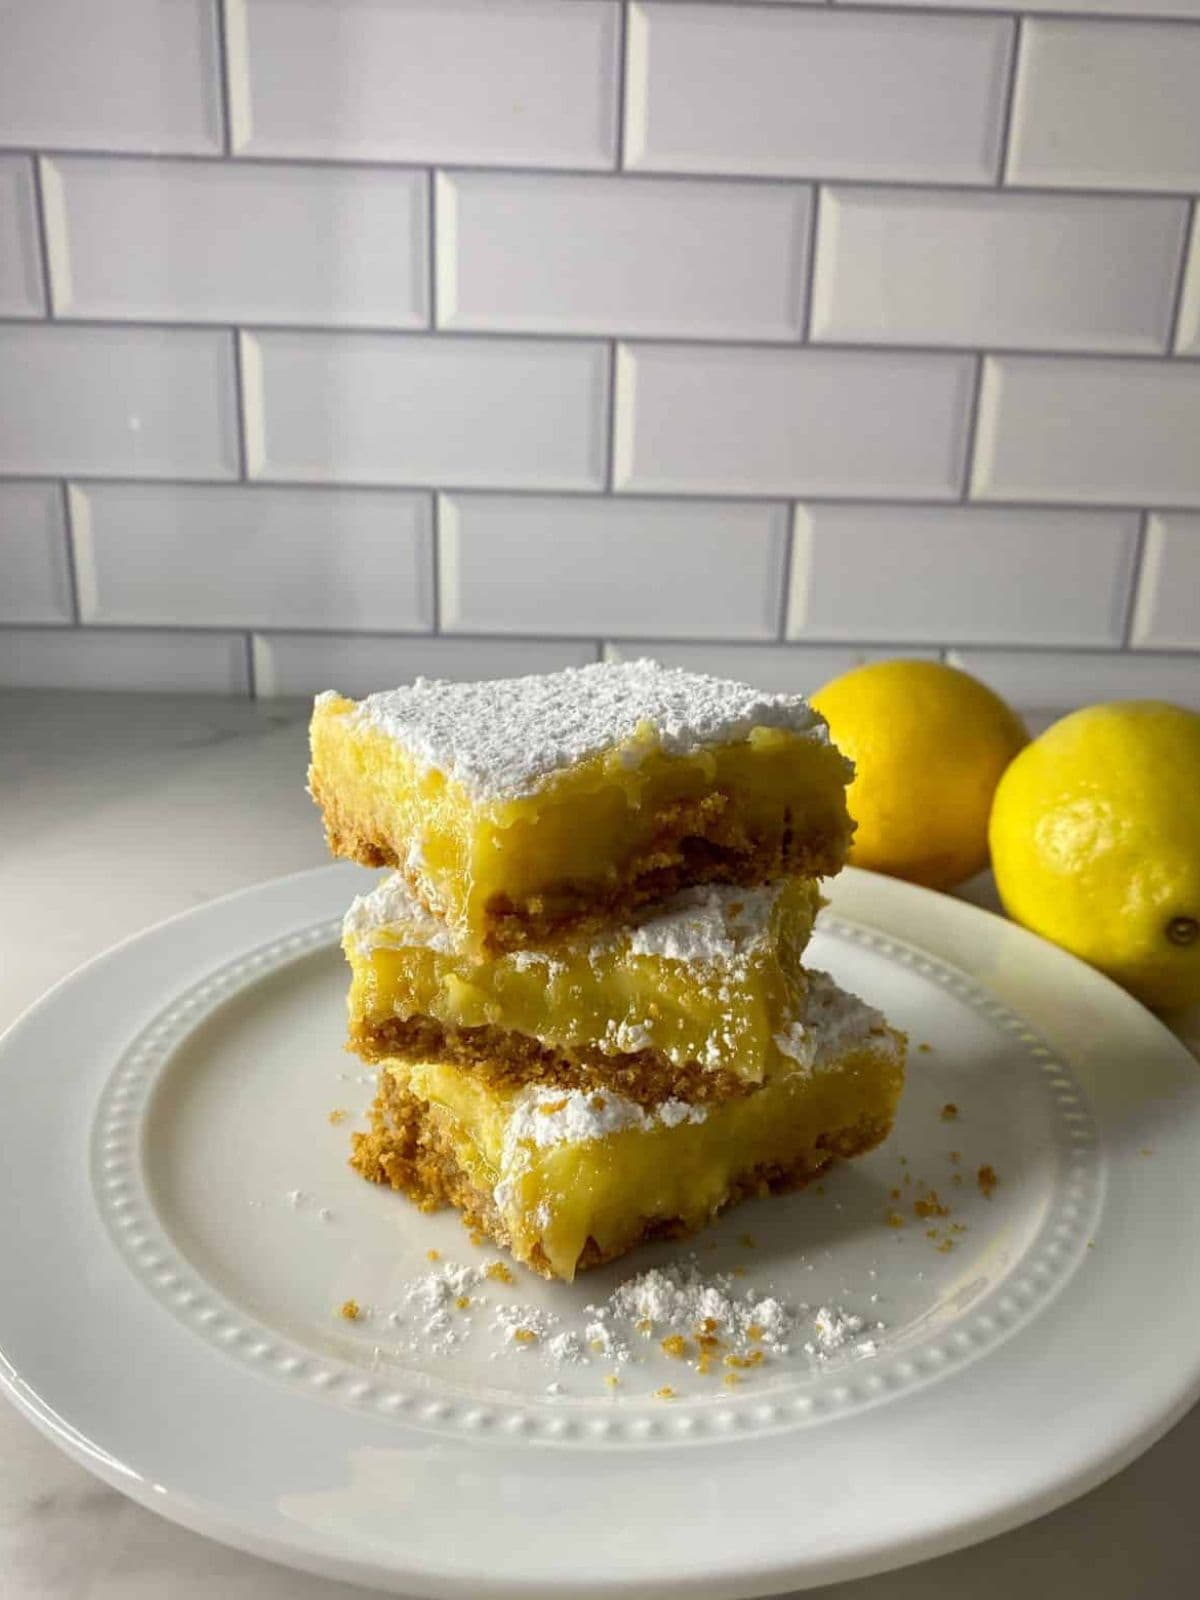 delicious lemon bars with a golden graham cracker crust, showcasing a perfect balance of tangy lemon filling and buttery, crumbly base.